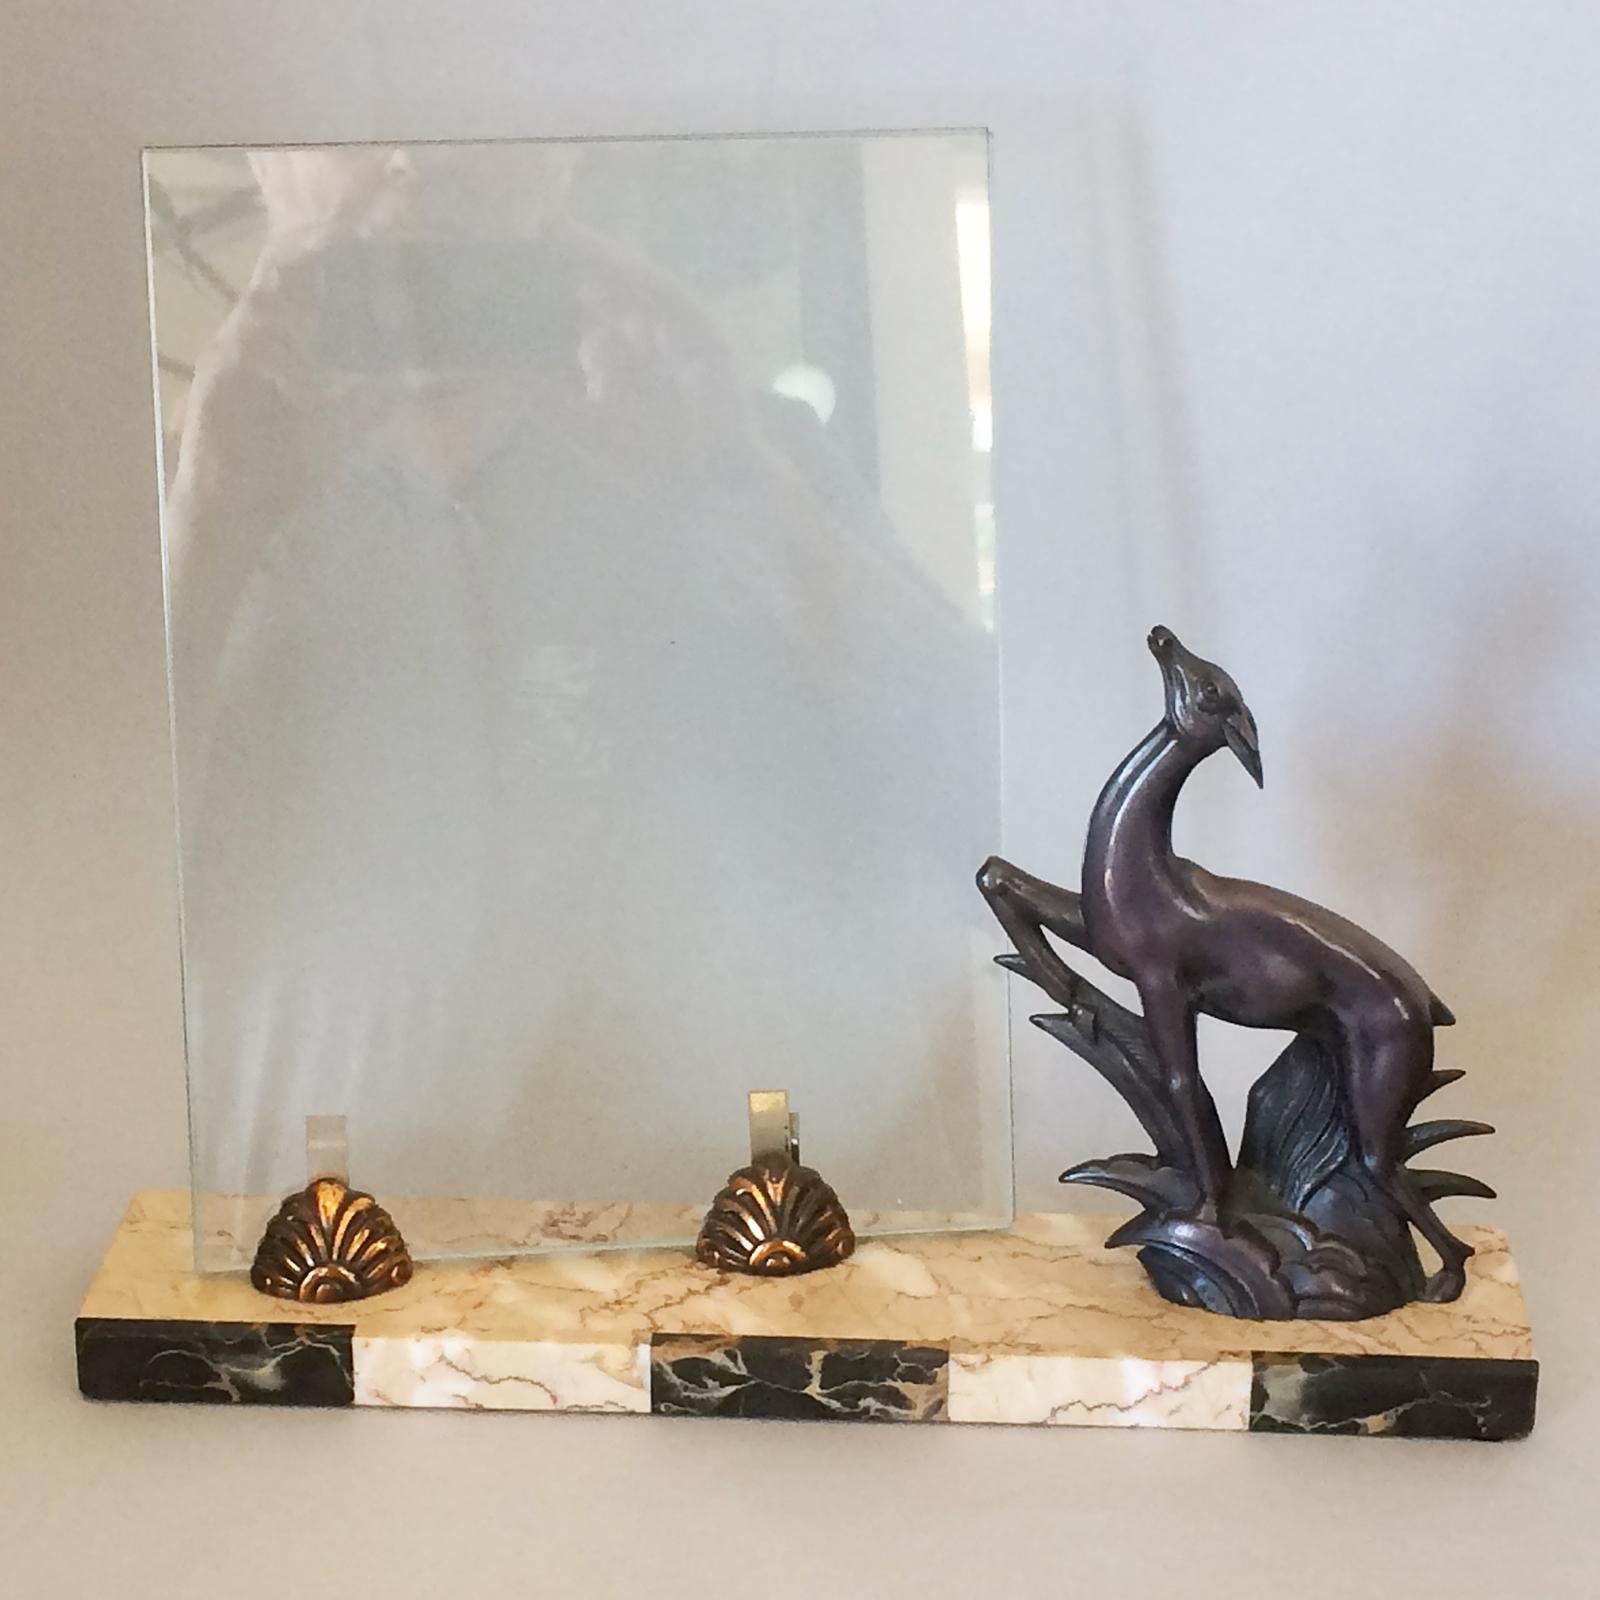 Art Deco photo frame of gazelle and flora, bronzed (or Japanned finish) on marble and alabaster decoration to front of base with bronzed glass support in same finish. The central 2 glass supports are finished the same as the gazelle, and the glass